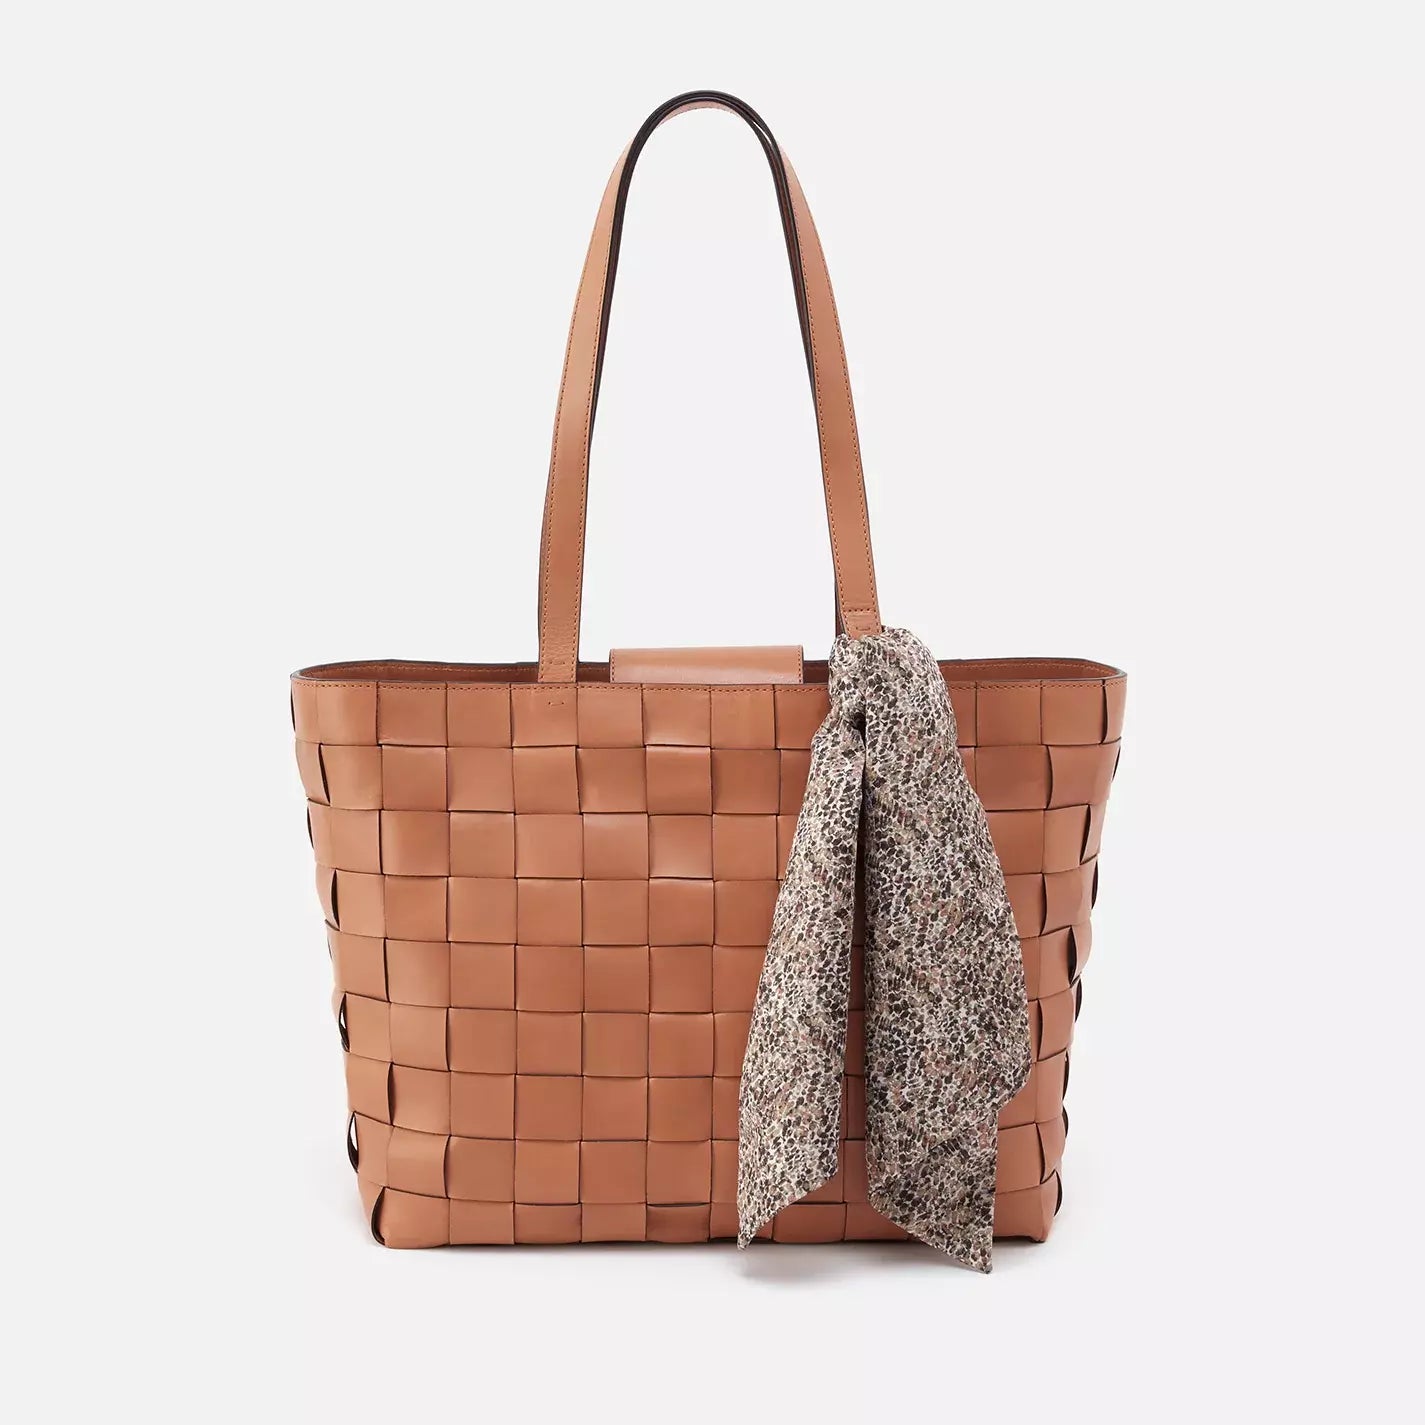 Sky Tote in Hand Woven Leather - Wheat